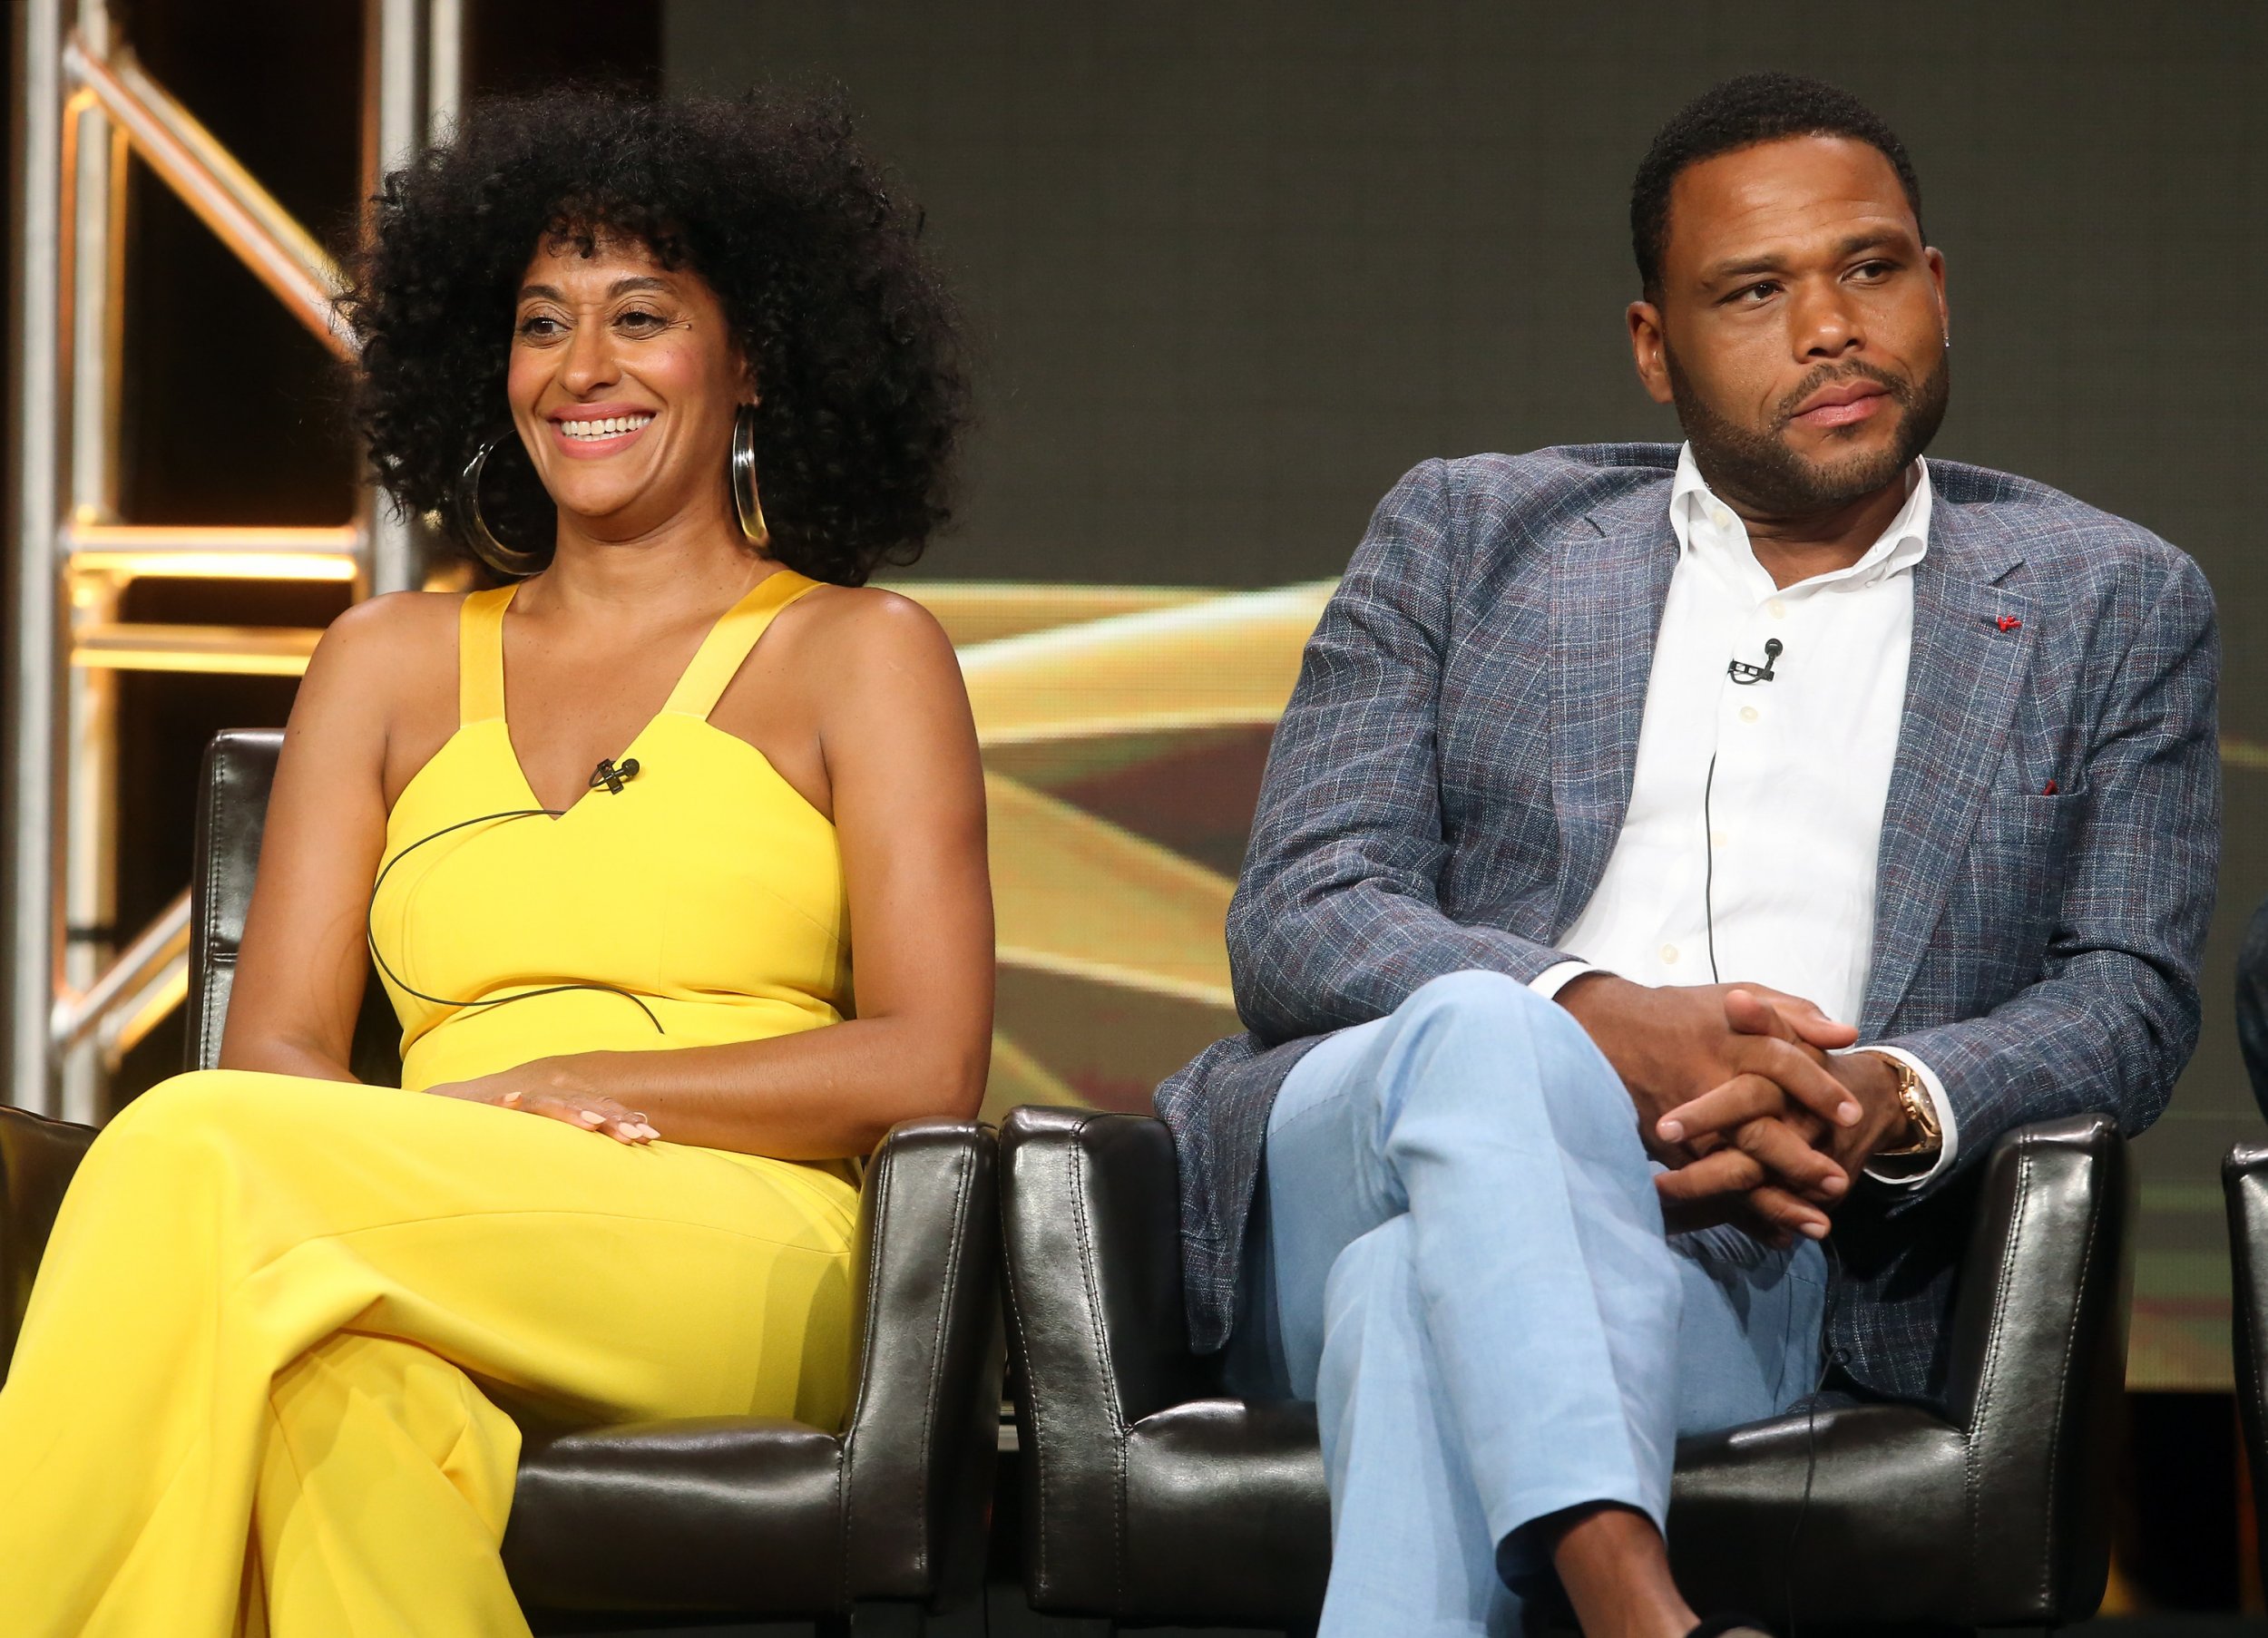 Black-ish stars Anthony Anderson and Tracee Ellis Ross